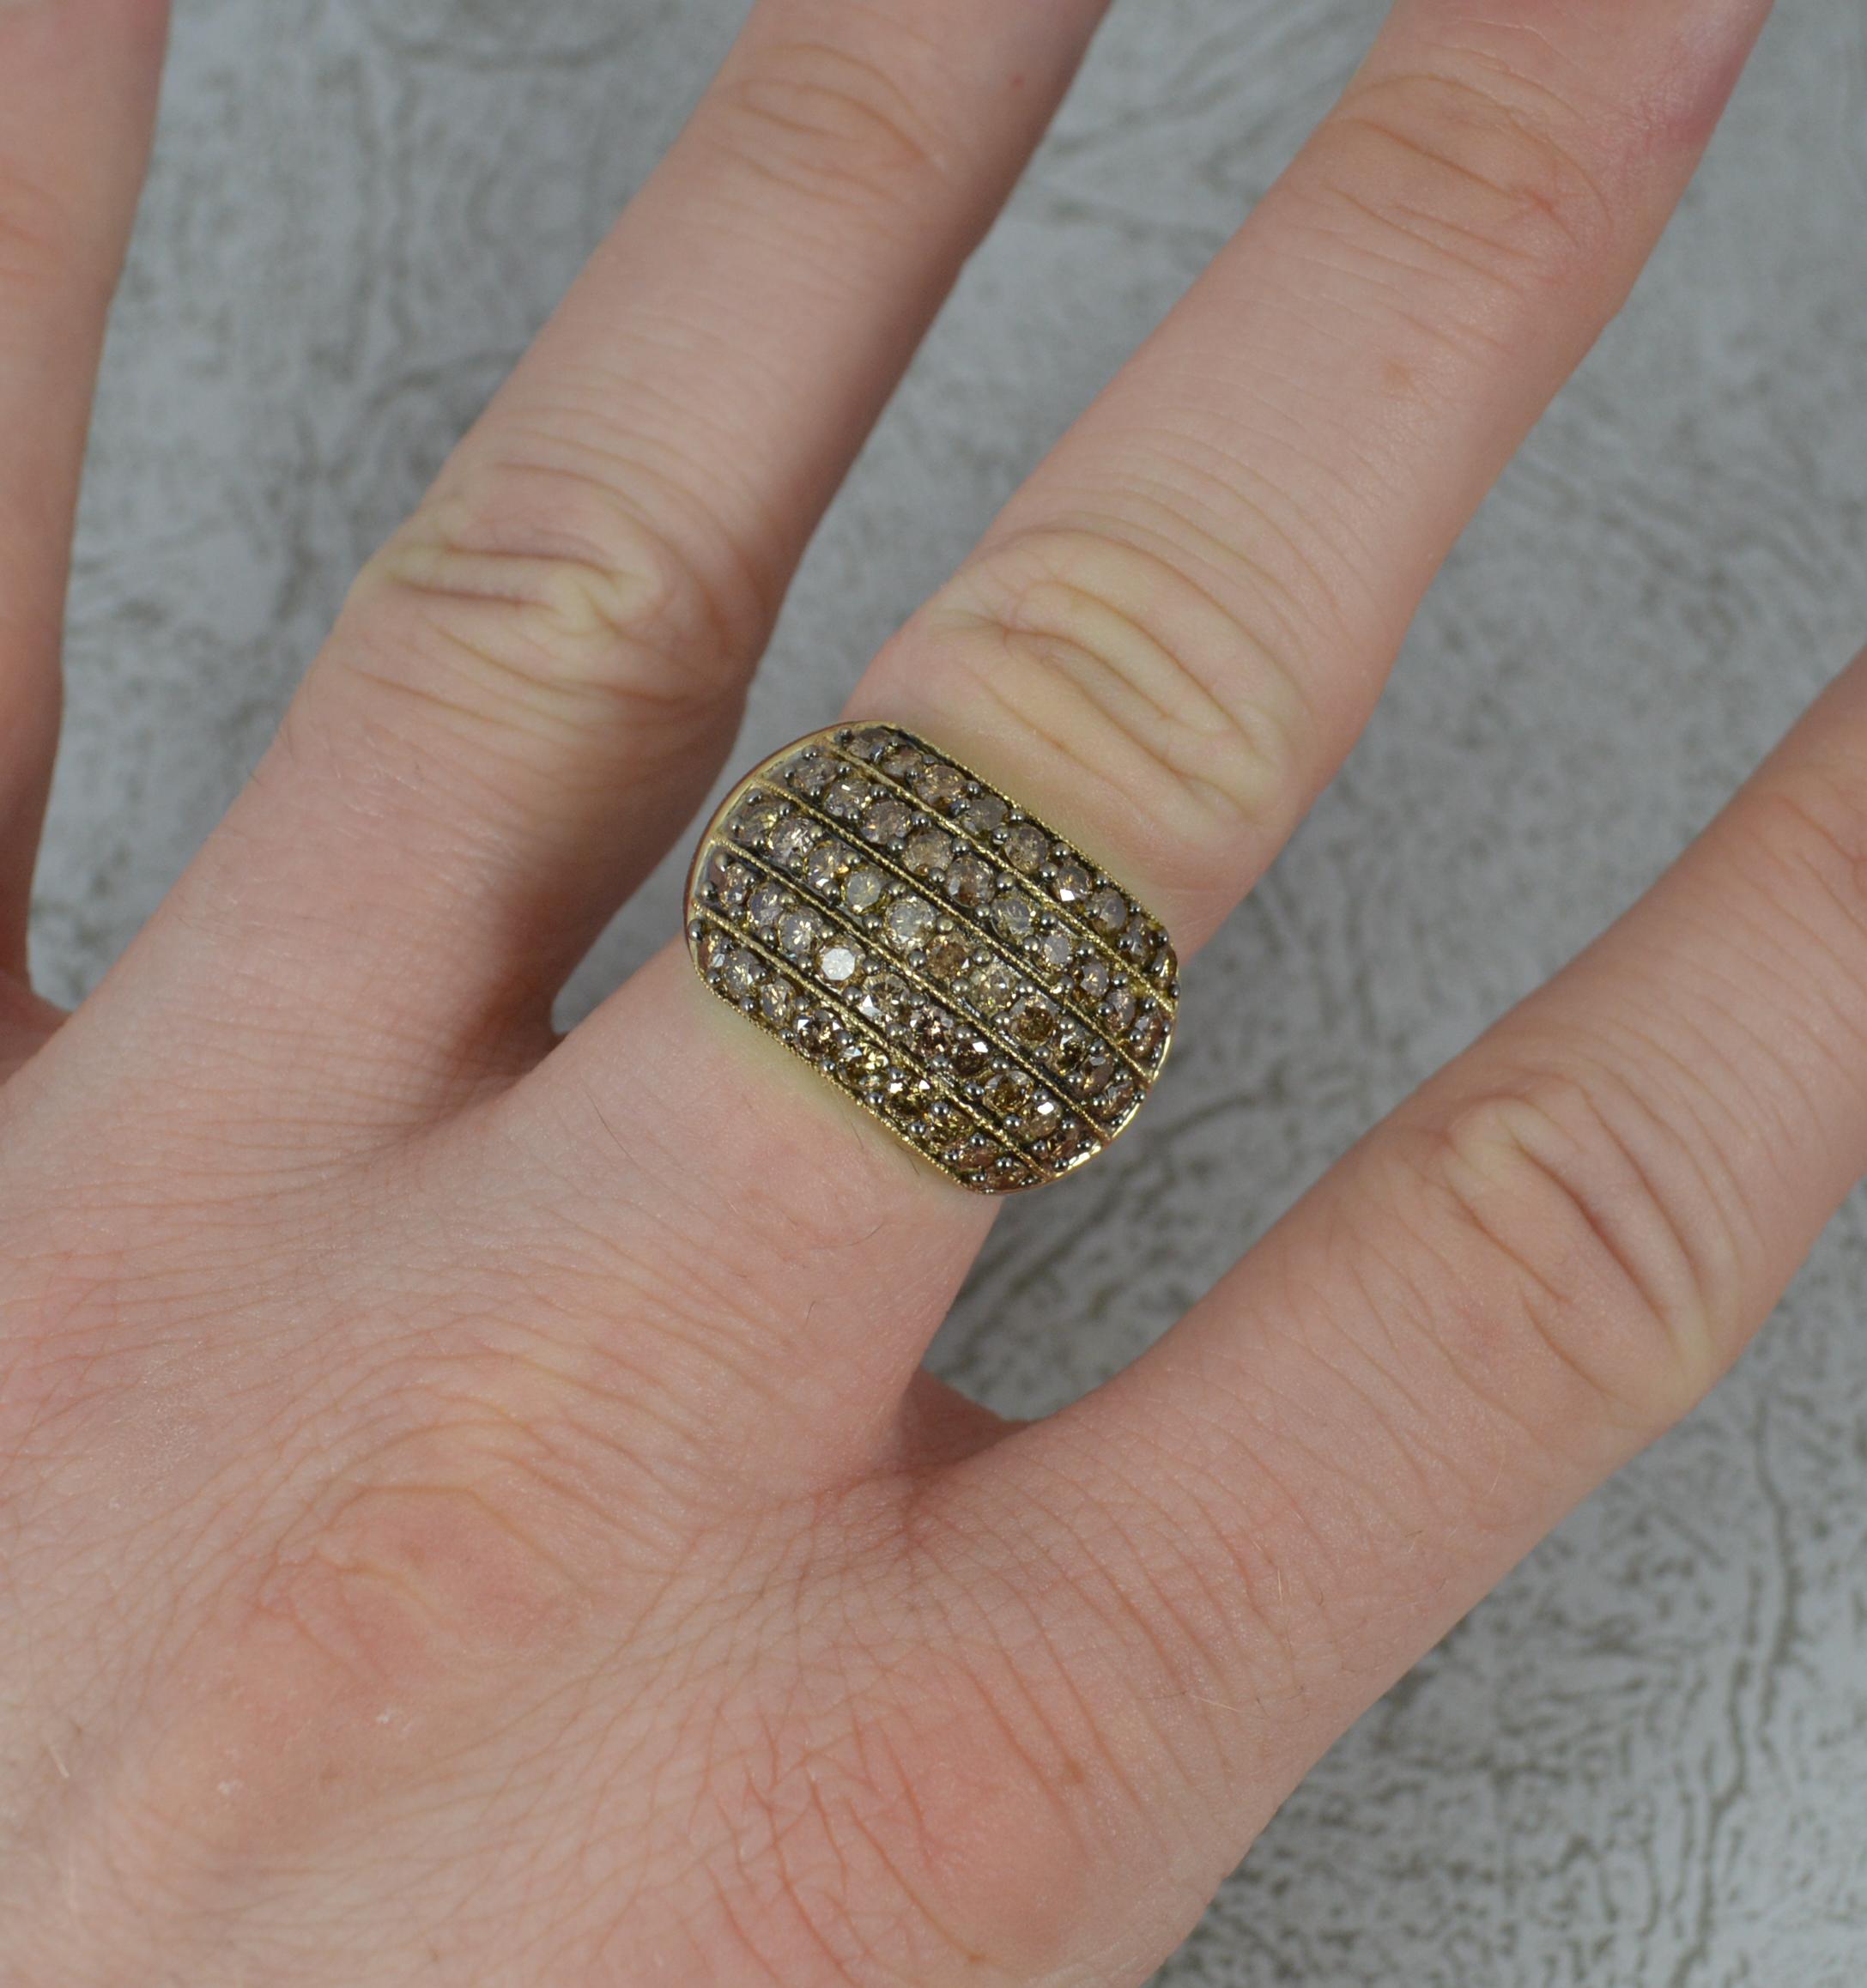 A 9 carat gold and diamond bling ring.
9ct yellow gold band and setting.
​Five row bombe shape, set with 1.50cts of natural round brilliant cut diamonds. Obvious champagne colour.
21mm x 14mm triple cluster head.

Condition ; Very good. Crisp